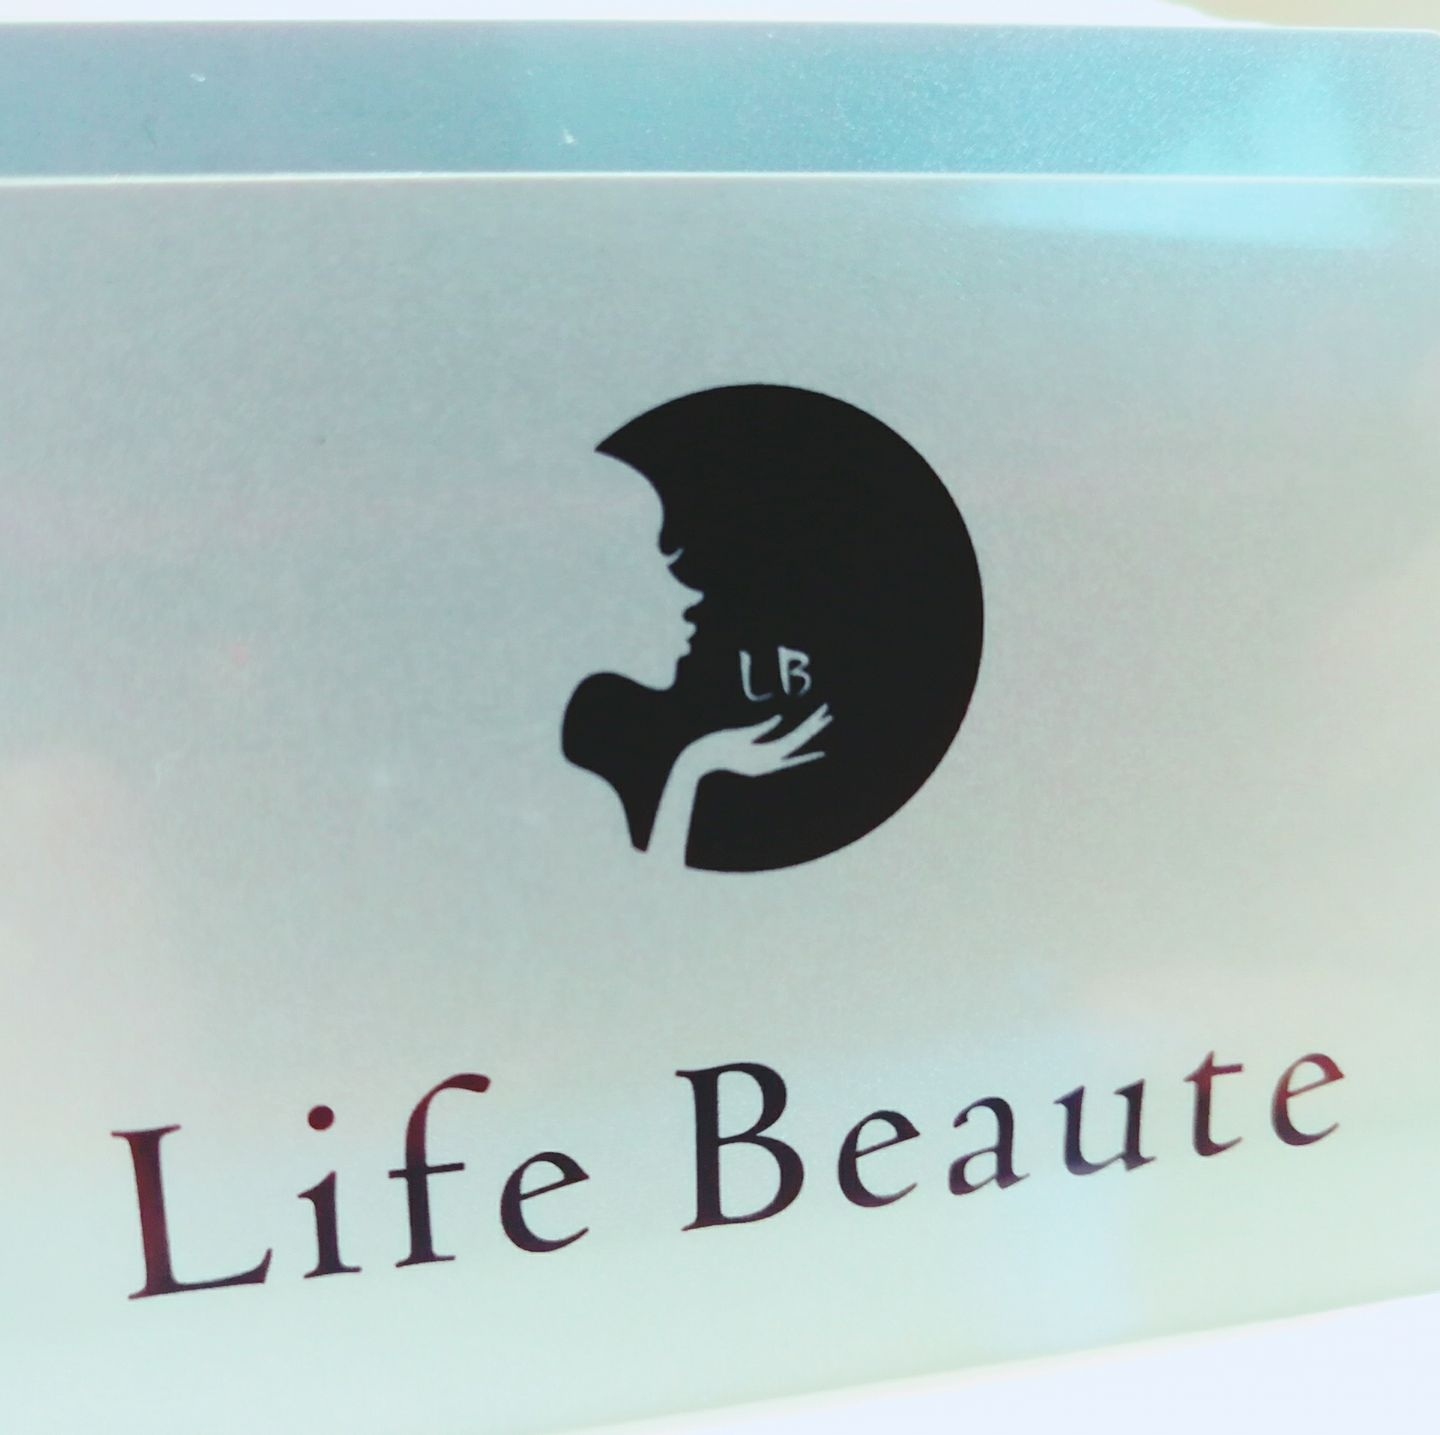 Hand and foot care: Life Beaute